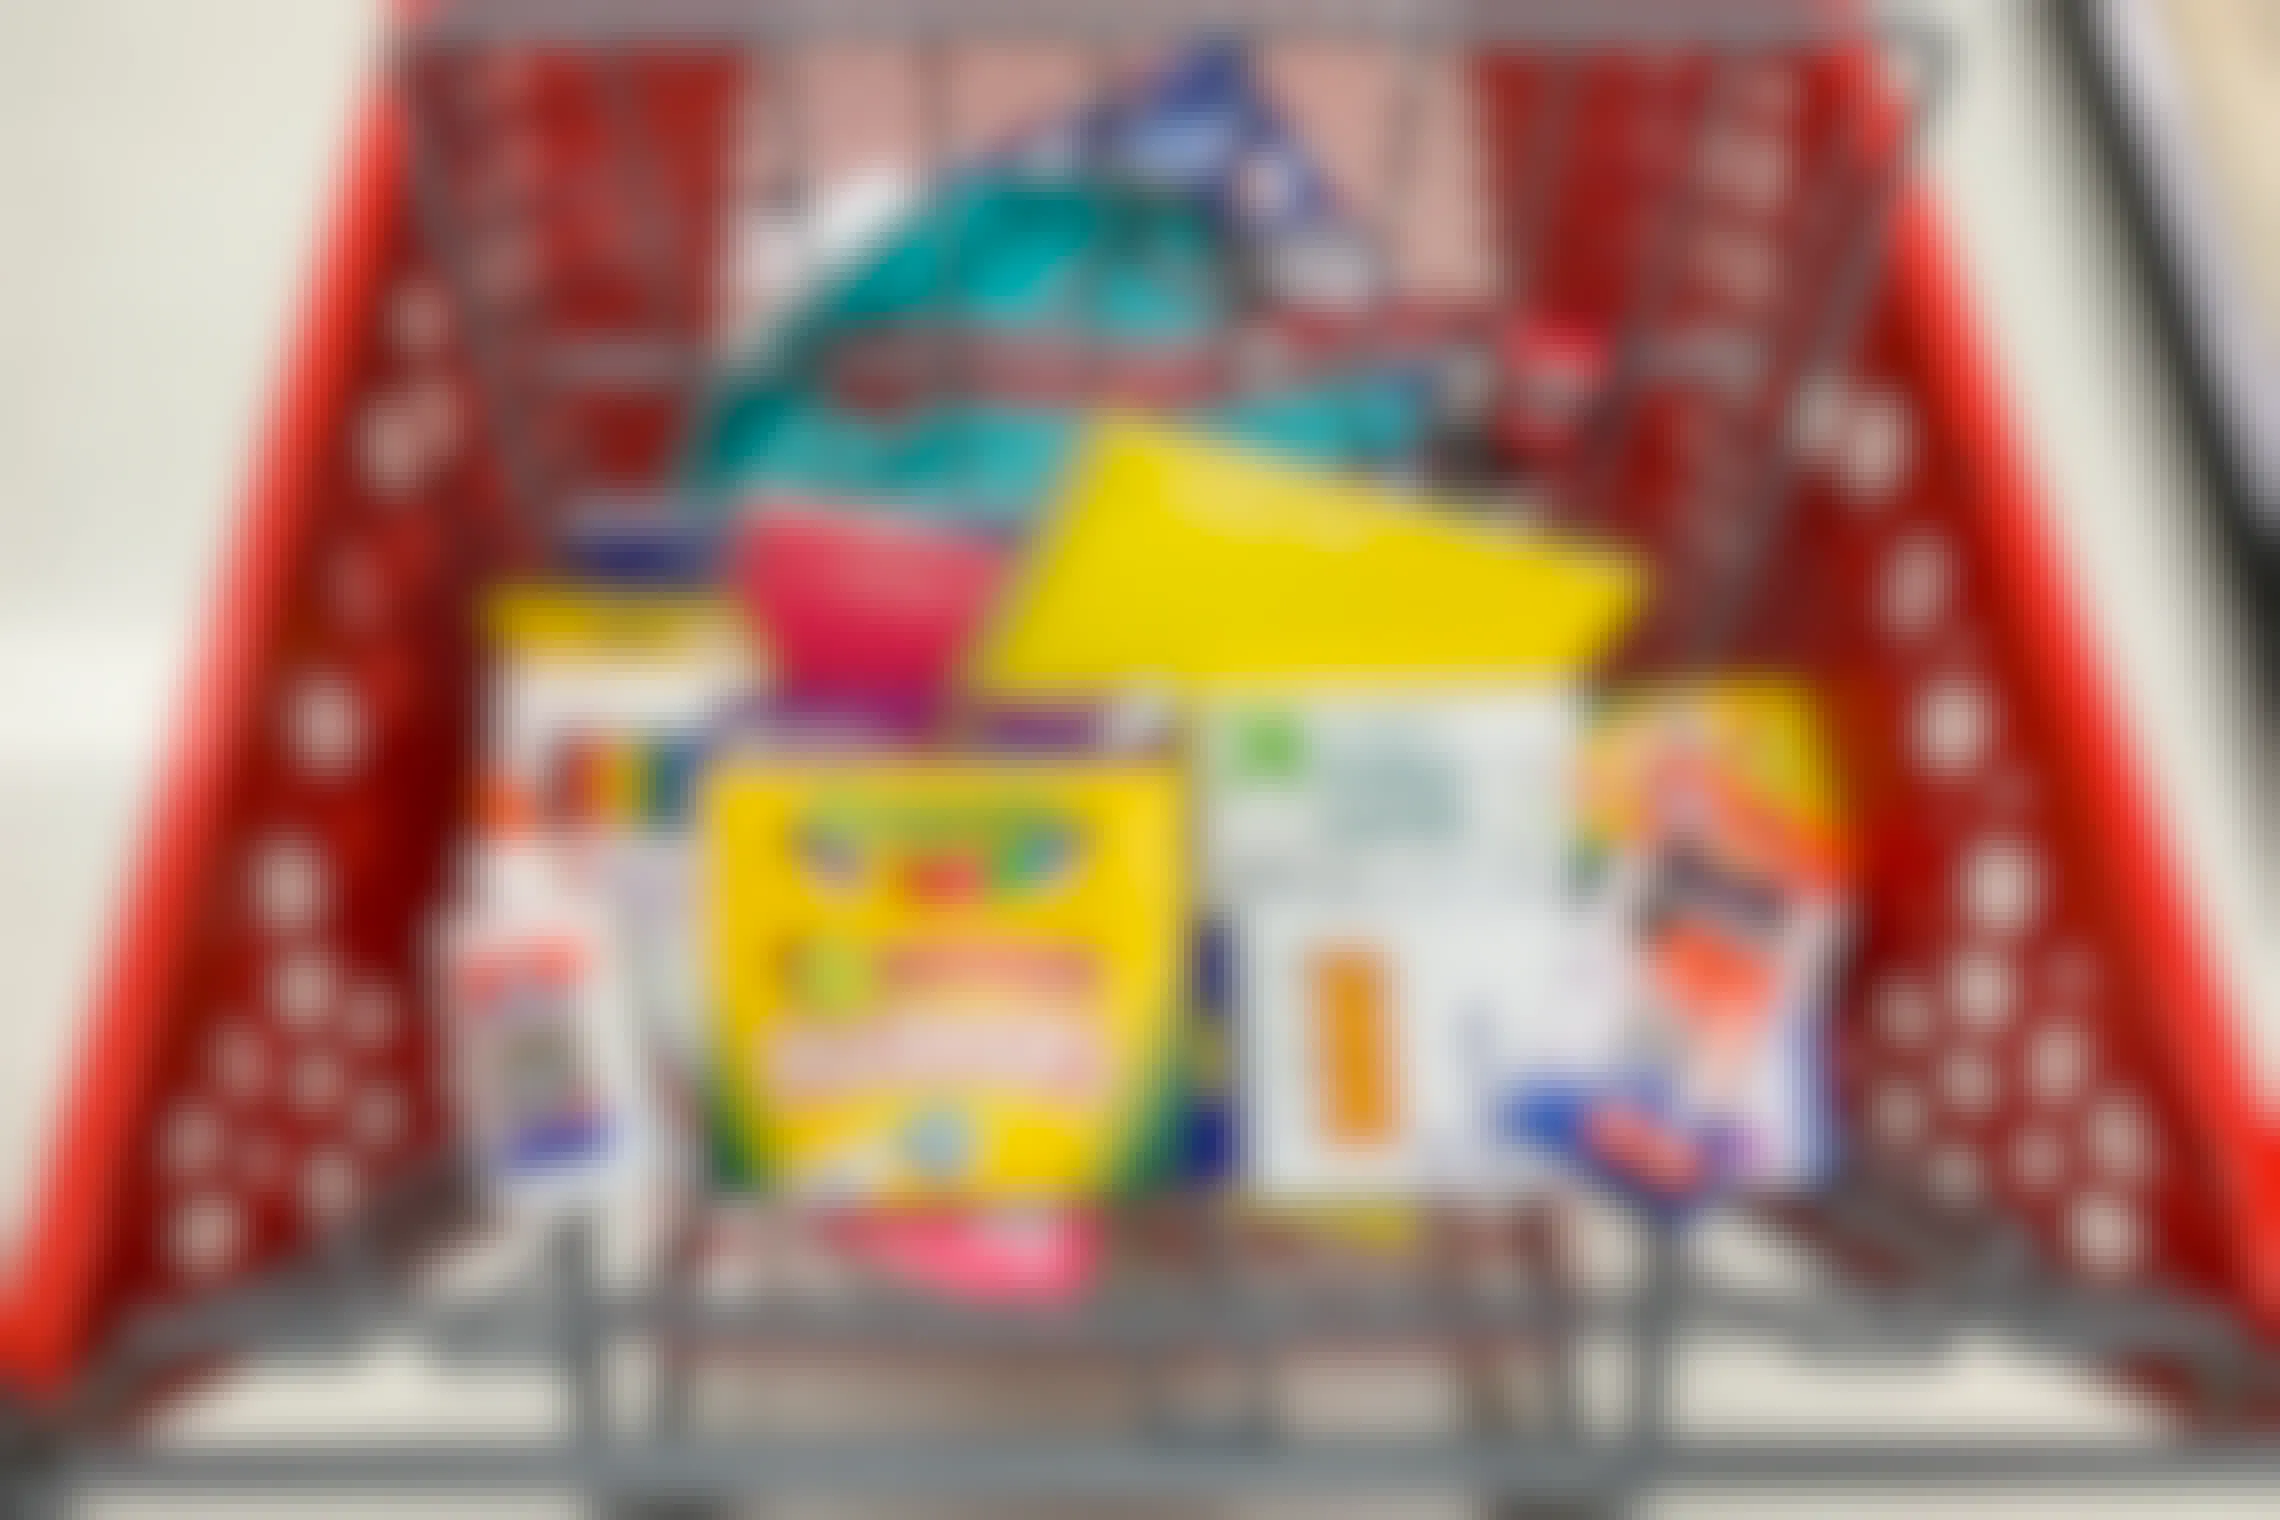 A Target shopping cart basket filled with school supplies such as Crayola markers, Elmer's glue, and Up&Up brand pencils, notebooks, and index cards.